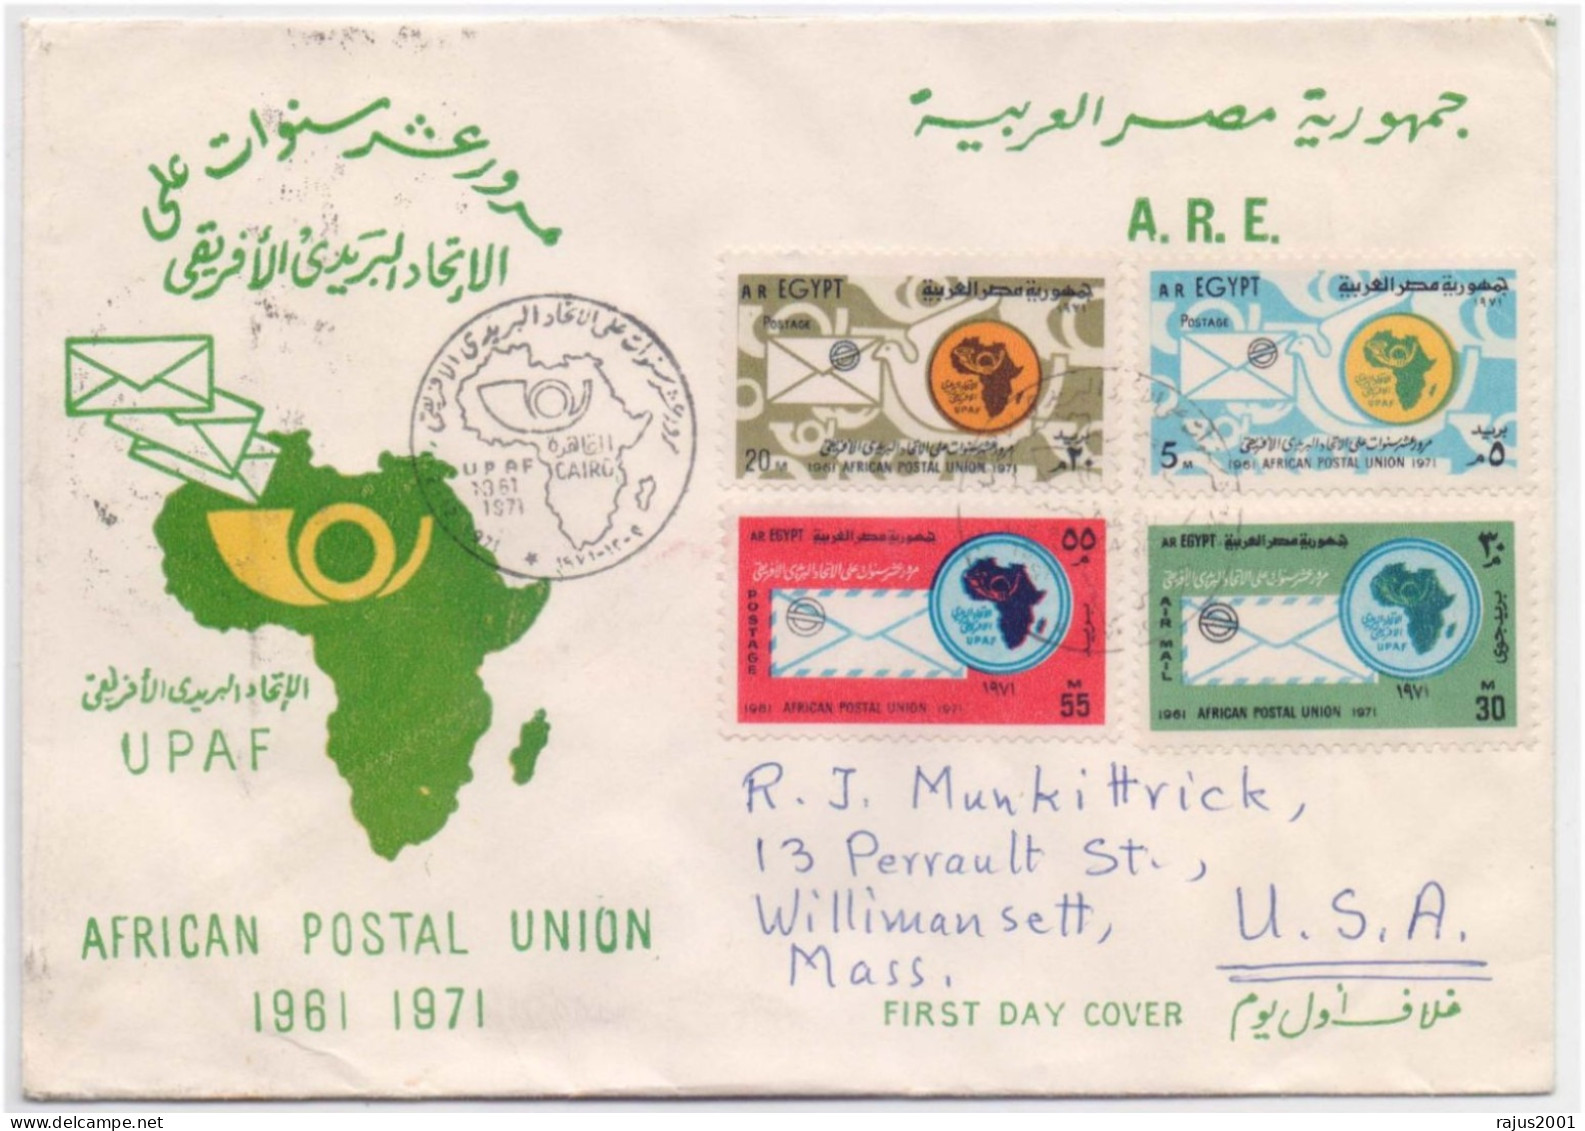 UPAF, African Postal Union, Mail Letter, Pigeon, Map, Transport Service, Egypt To USA Circulated Cover 1971 - Poste